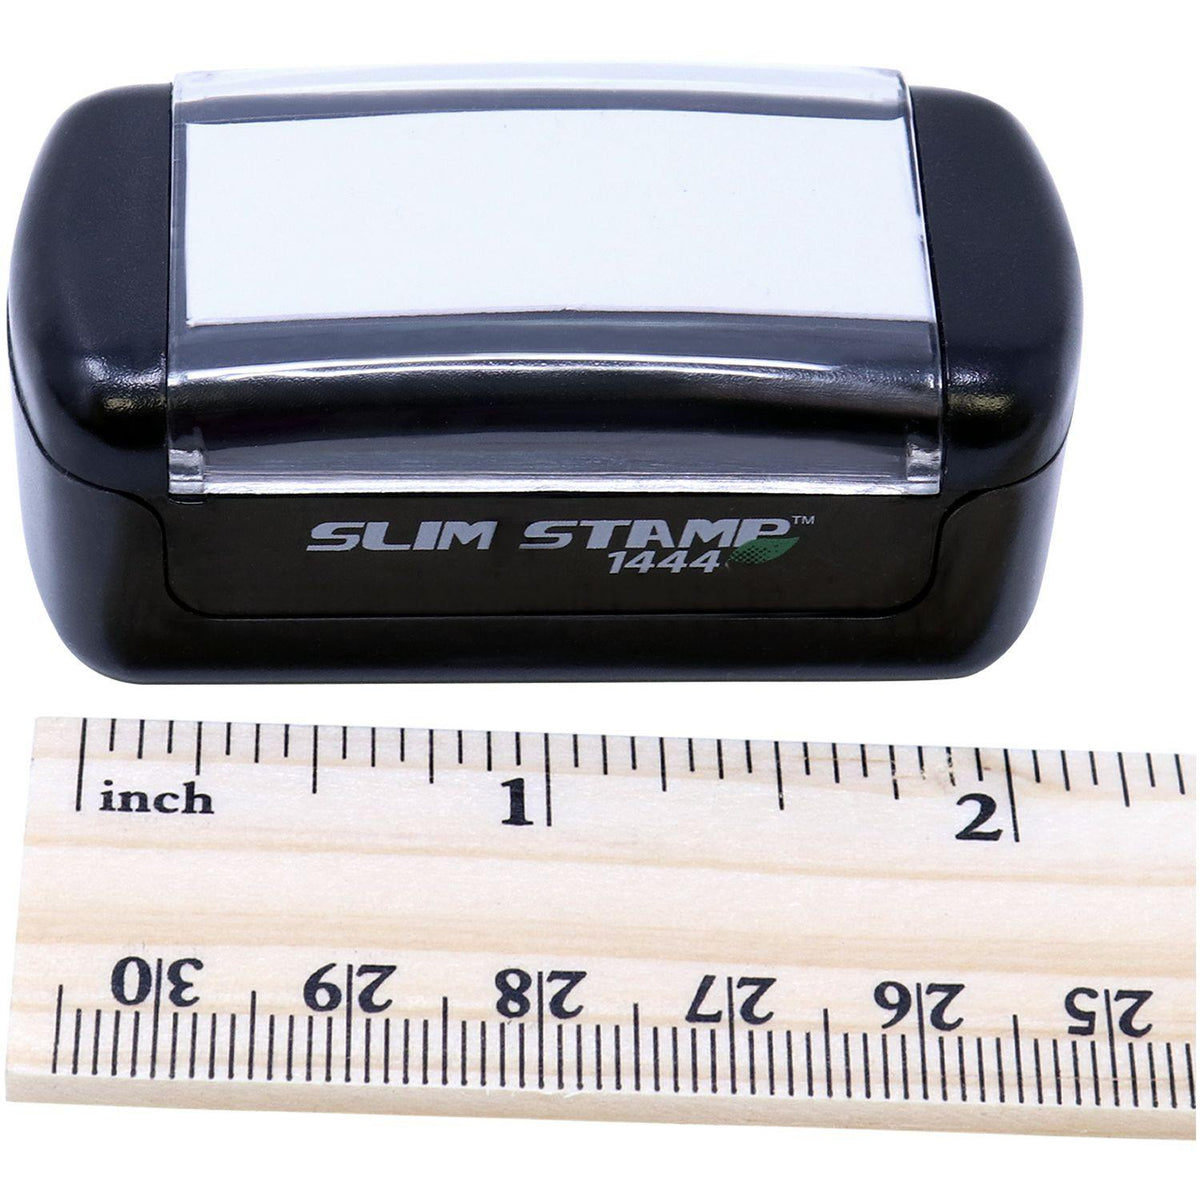 Measurement Slim Pre Inked Copy For Your Information Stamp with Ruler